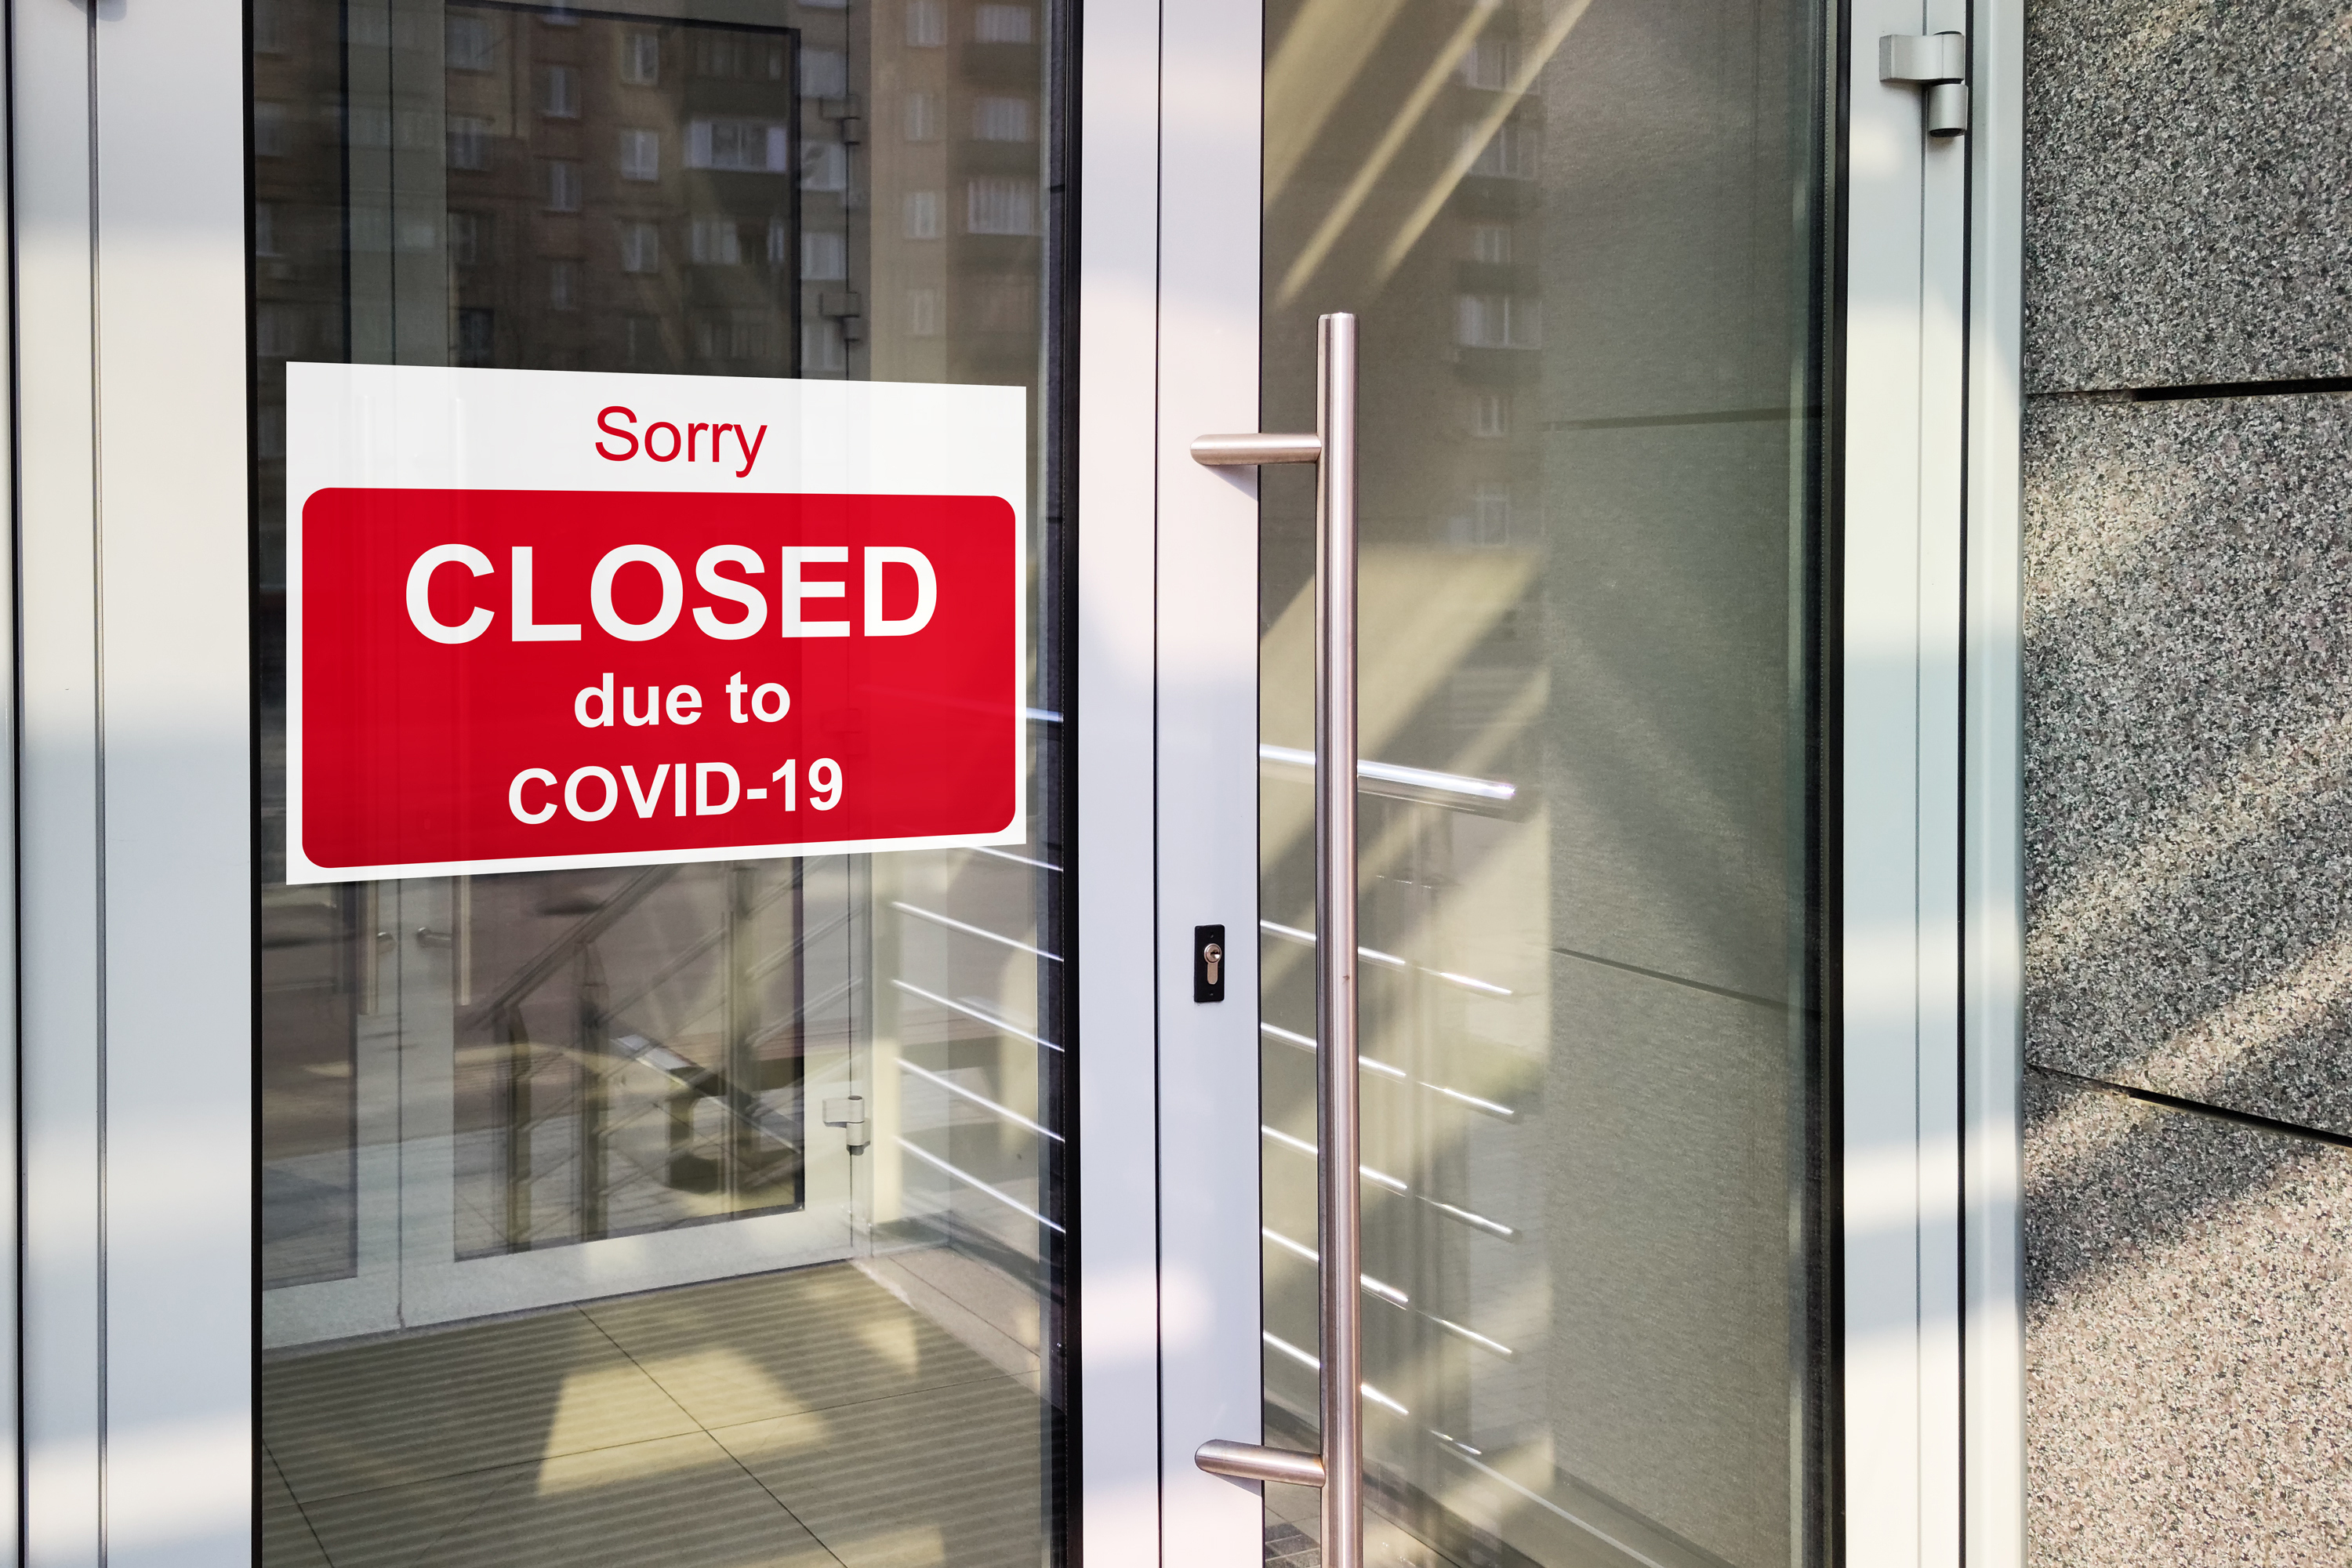 Sign on business door reads &quot;Sorry CLOSED due to COVID-19&quot; indicating temporary closure